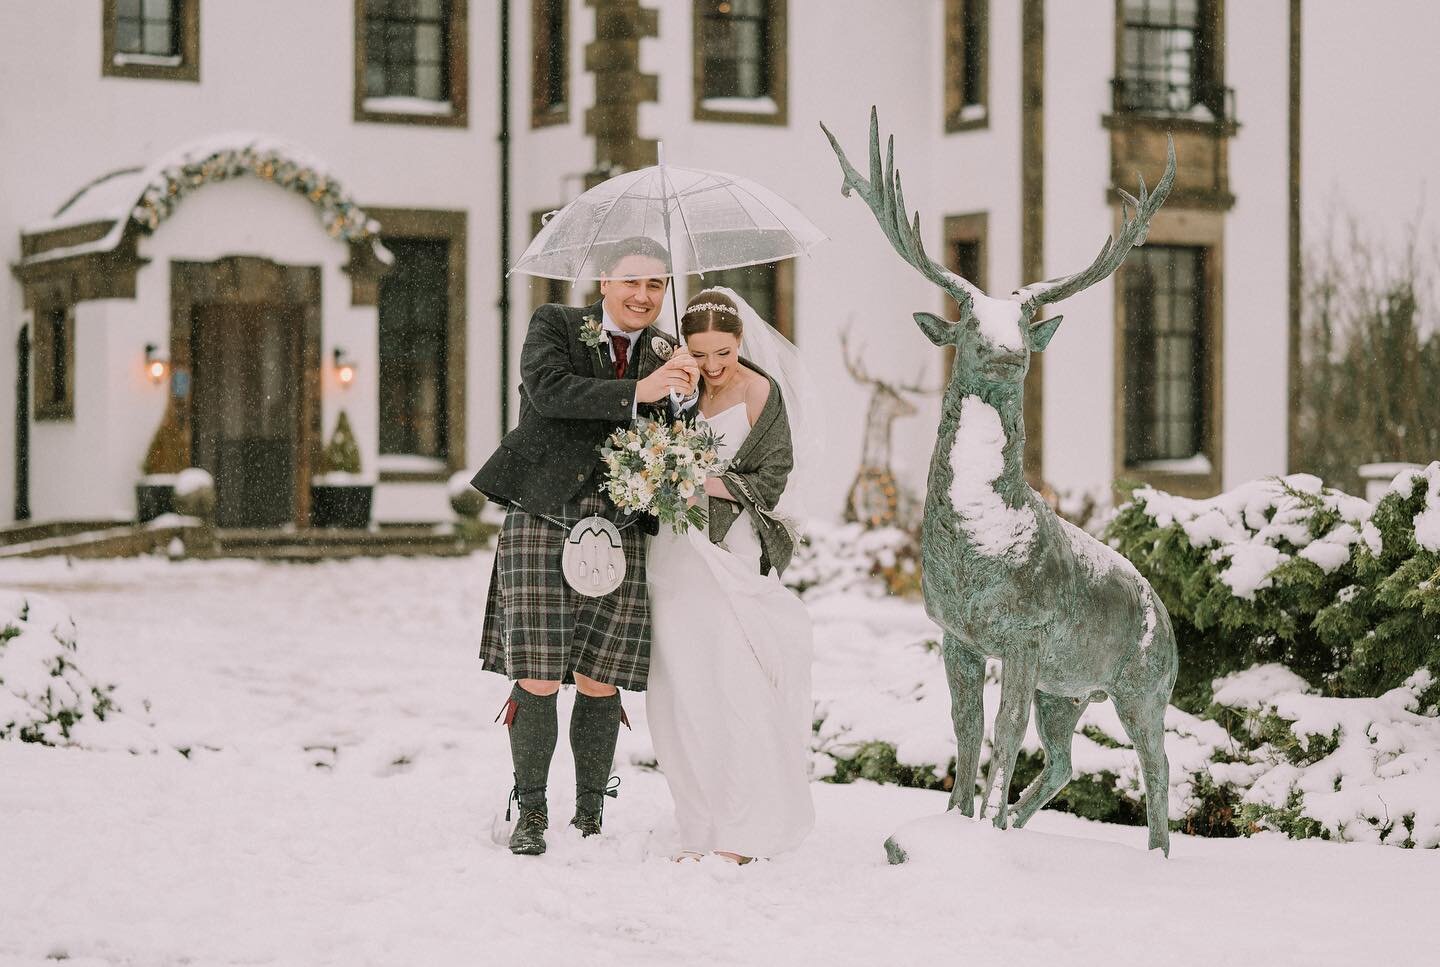 When you stand outside in the freezing cold snow for a few photos? I&rsquo;ll you forever! Rebecca &amp; Keith were troopers ❄️
.
.
.
.
.
#nikon #wedding #letsgetmarried #gleddoch #gleddochhousehotel #gleddochhotel #gleddochwedding #gleddochweddings 